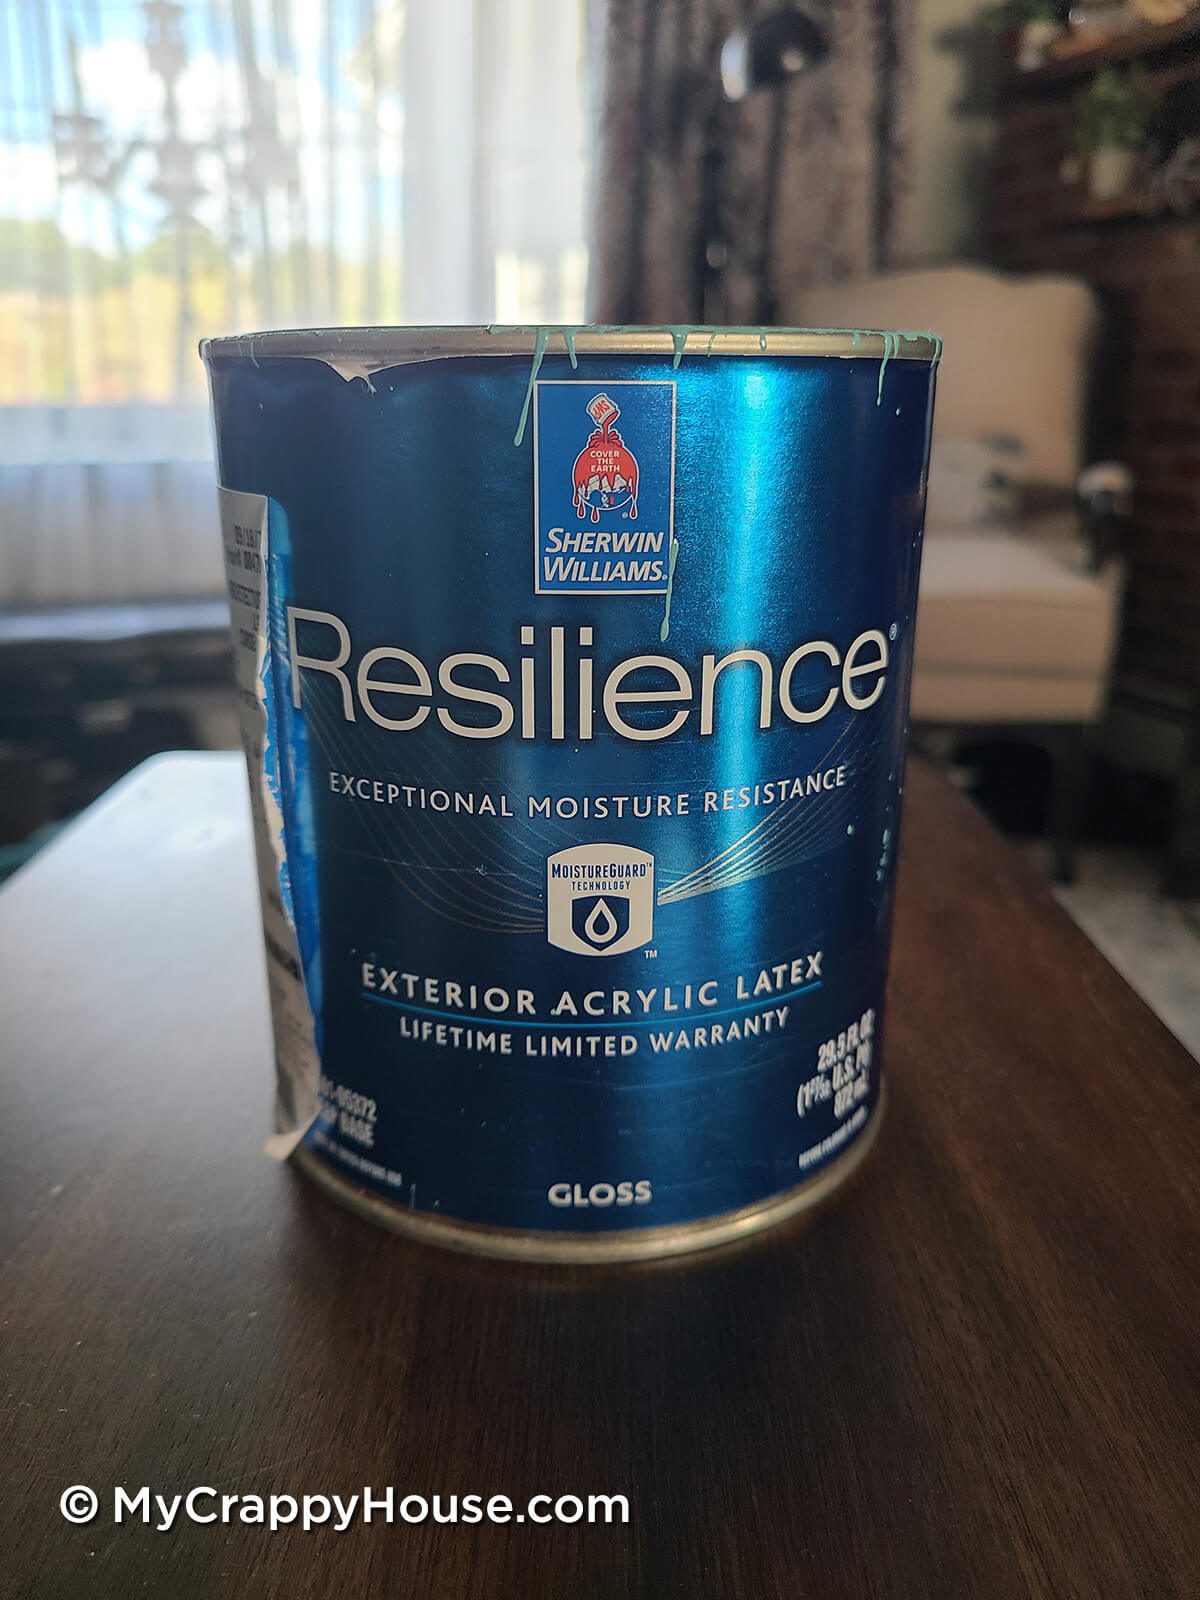 Sherwin Williams Resilience Paint Can with custom Aqua color mix